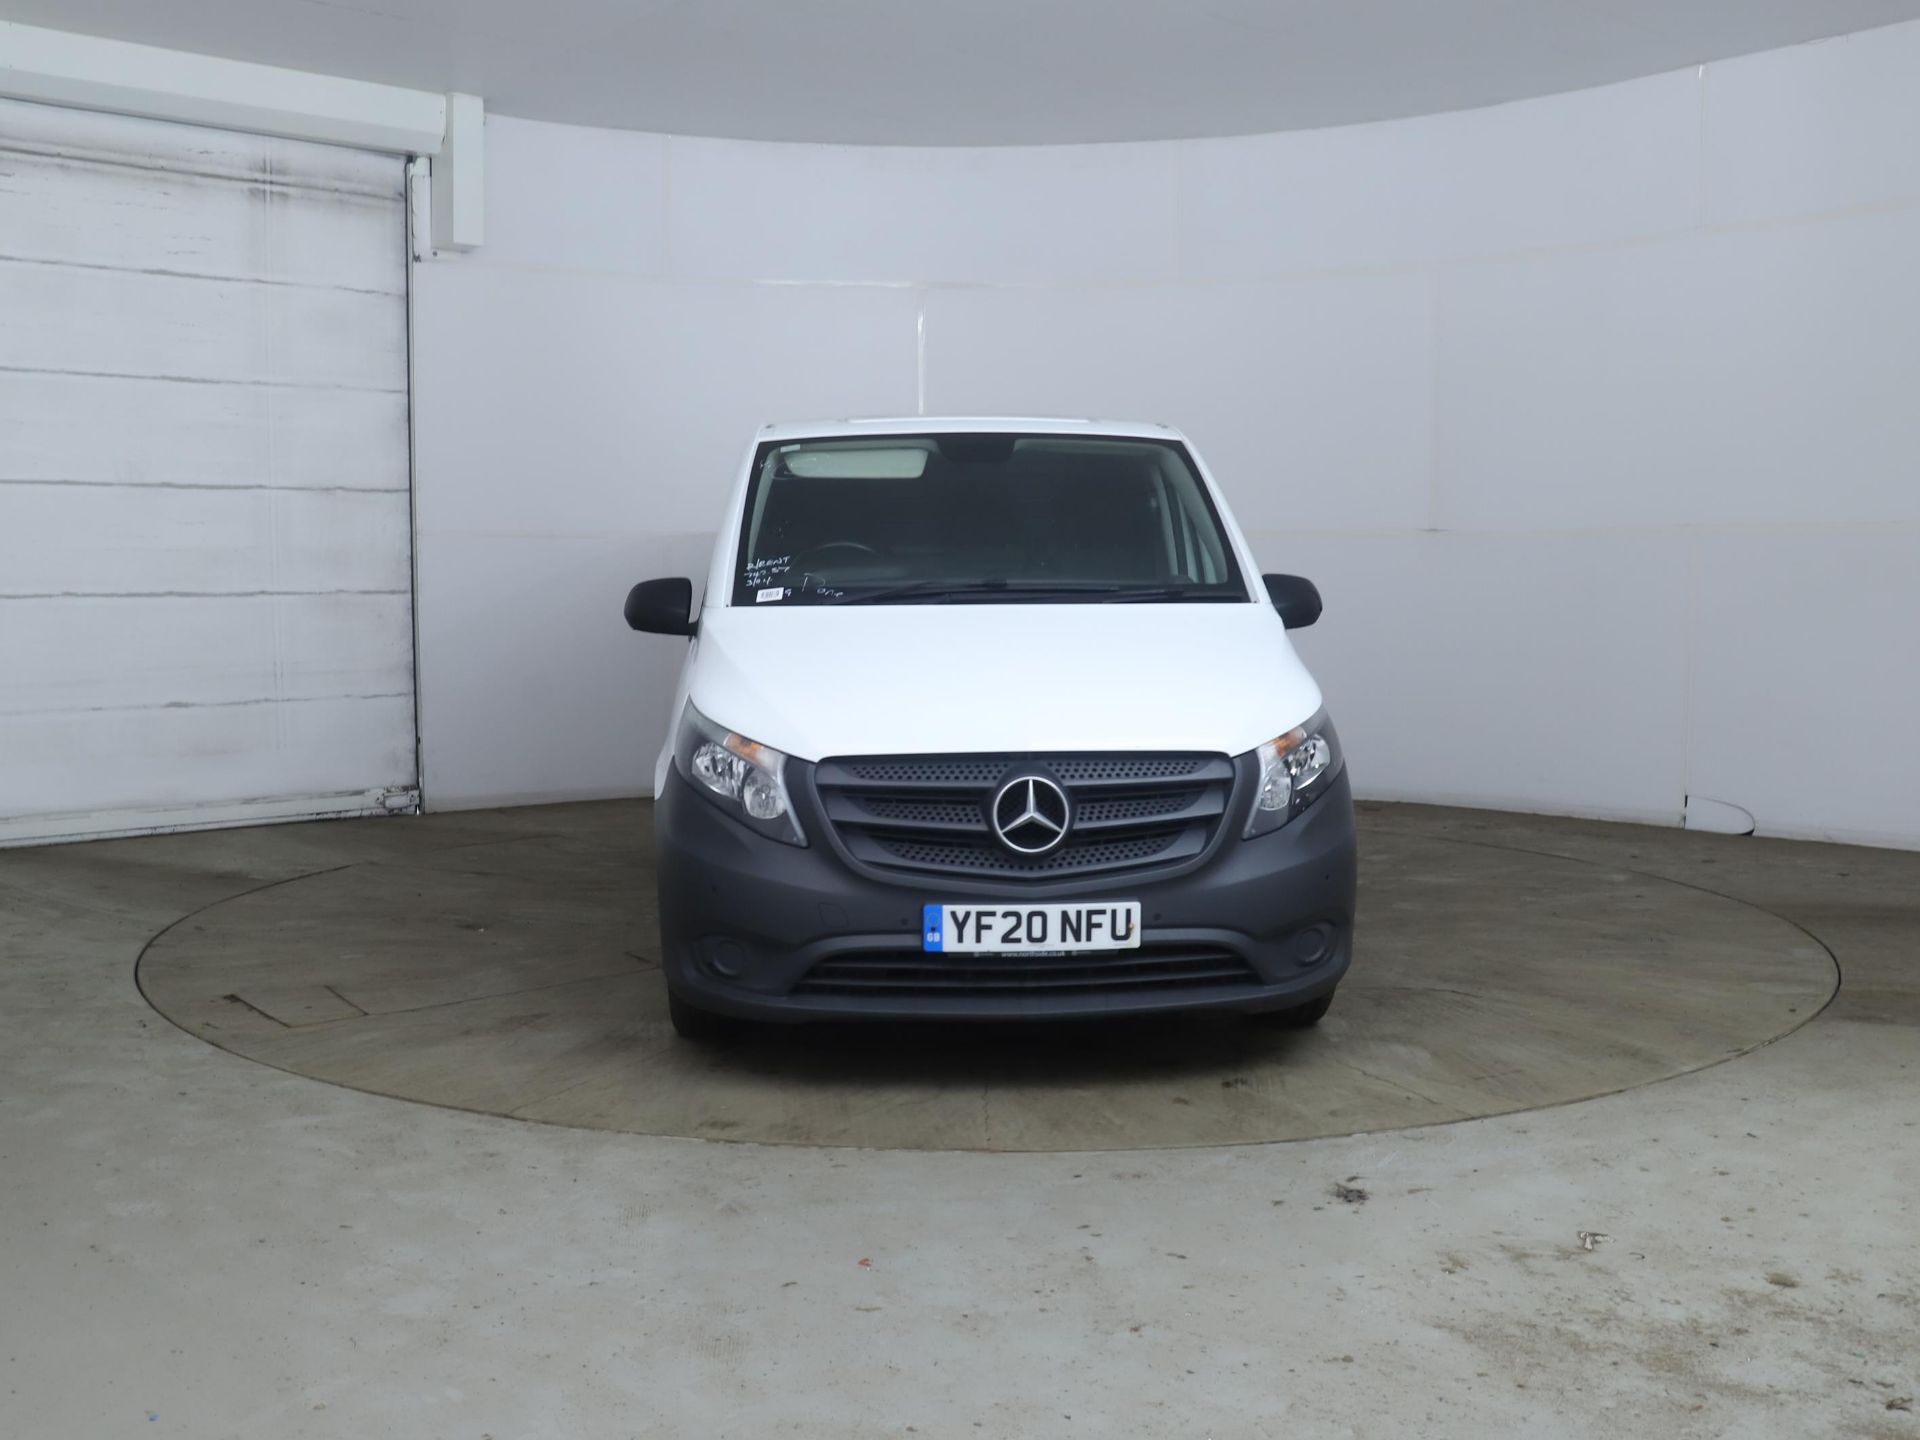 MERCEDES BENZ VITO CDI PURE - 2020 20 Reg - Only 74k Miles - 1 Owner From New - Parking Sensors - Bild 4 aus 12